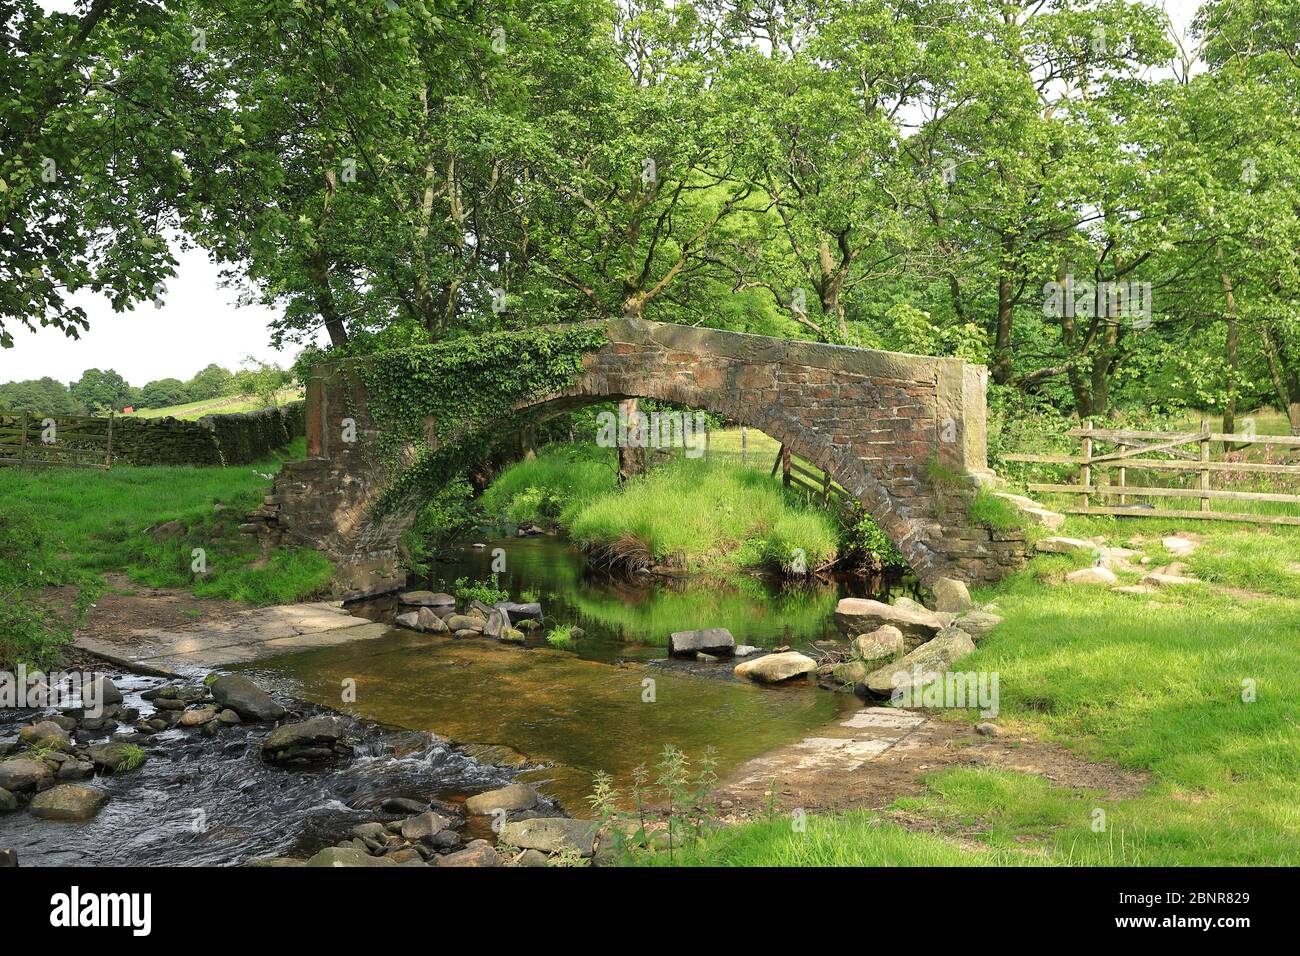 A stone bridge crosses a stream in the West Yorkshire countryside close to the village of Haworth in northern England. Stock Photo